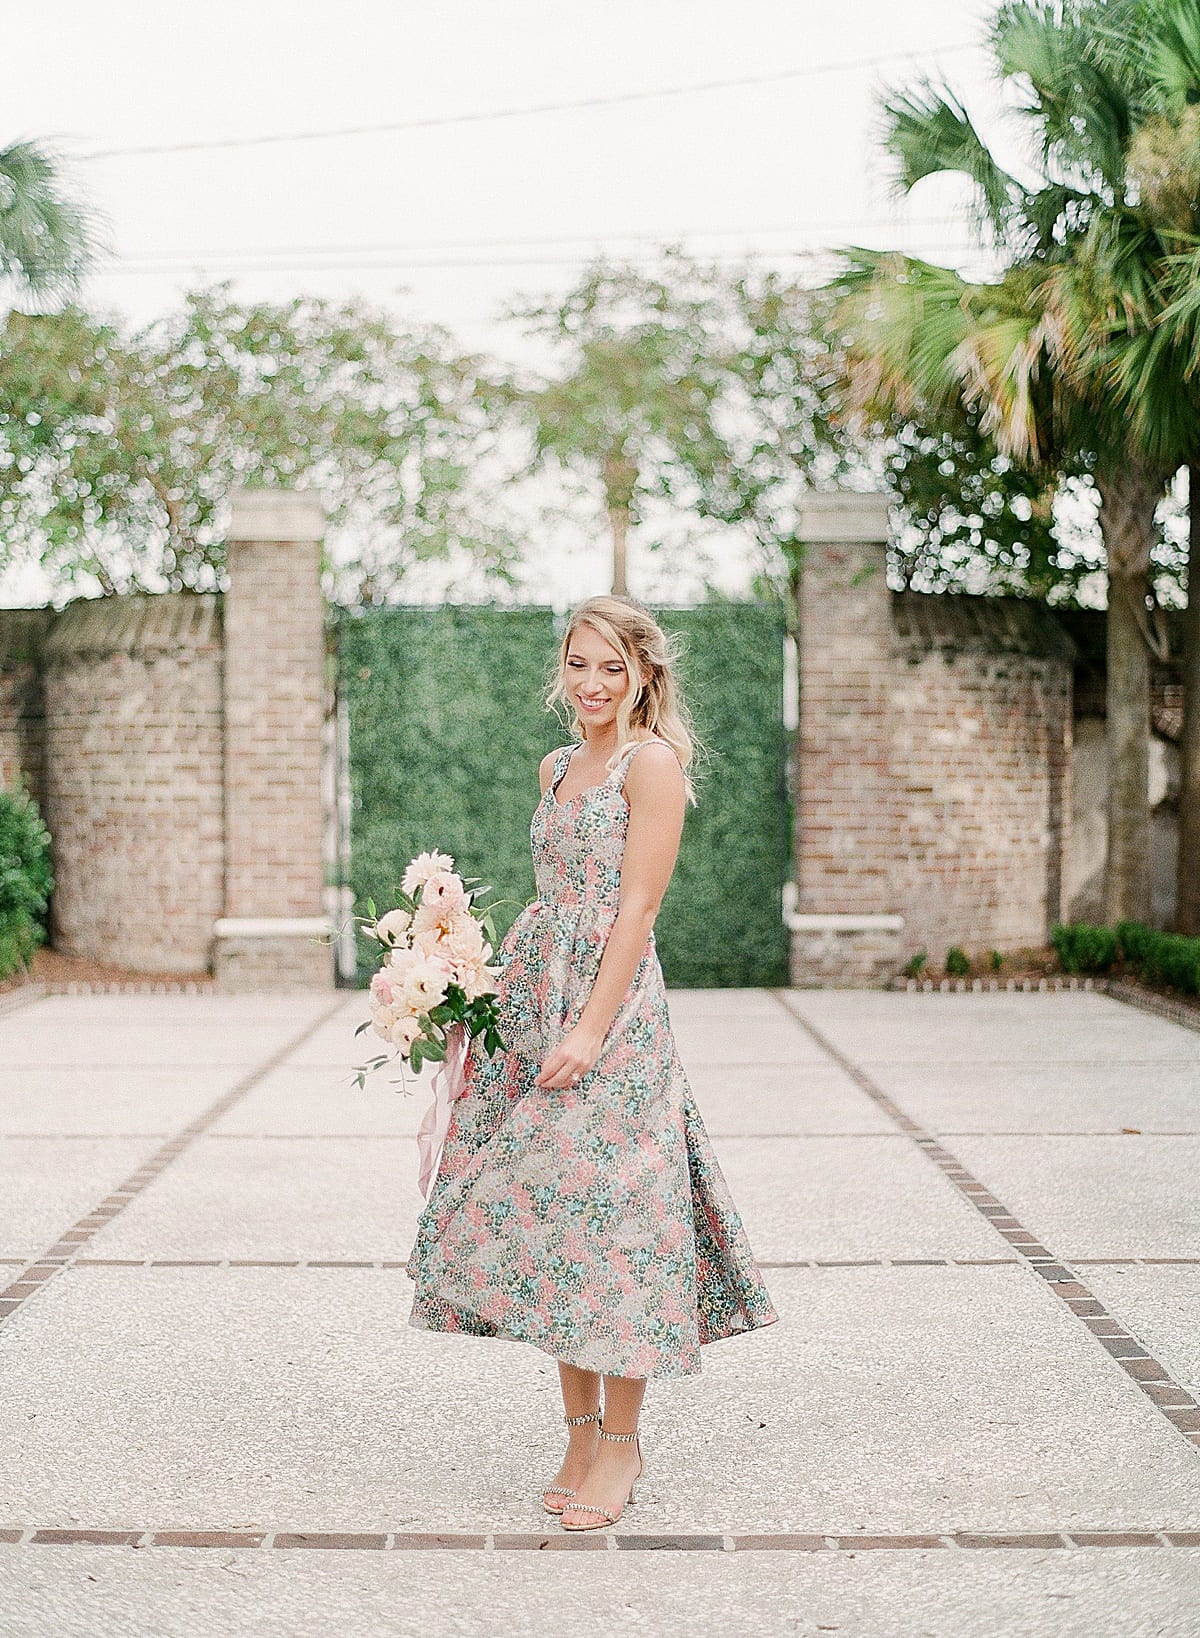 Girl Twirling in a Dress Holding Bouquet in Courtyard Photo